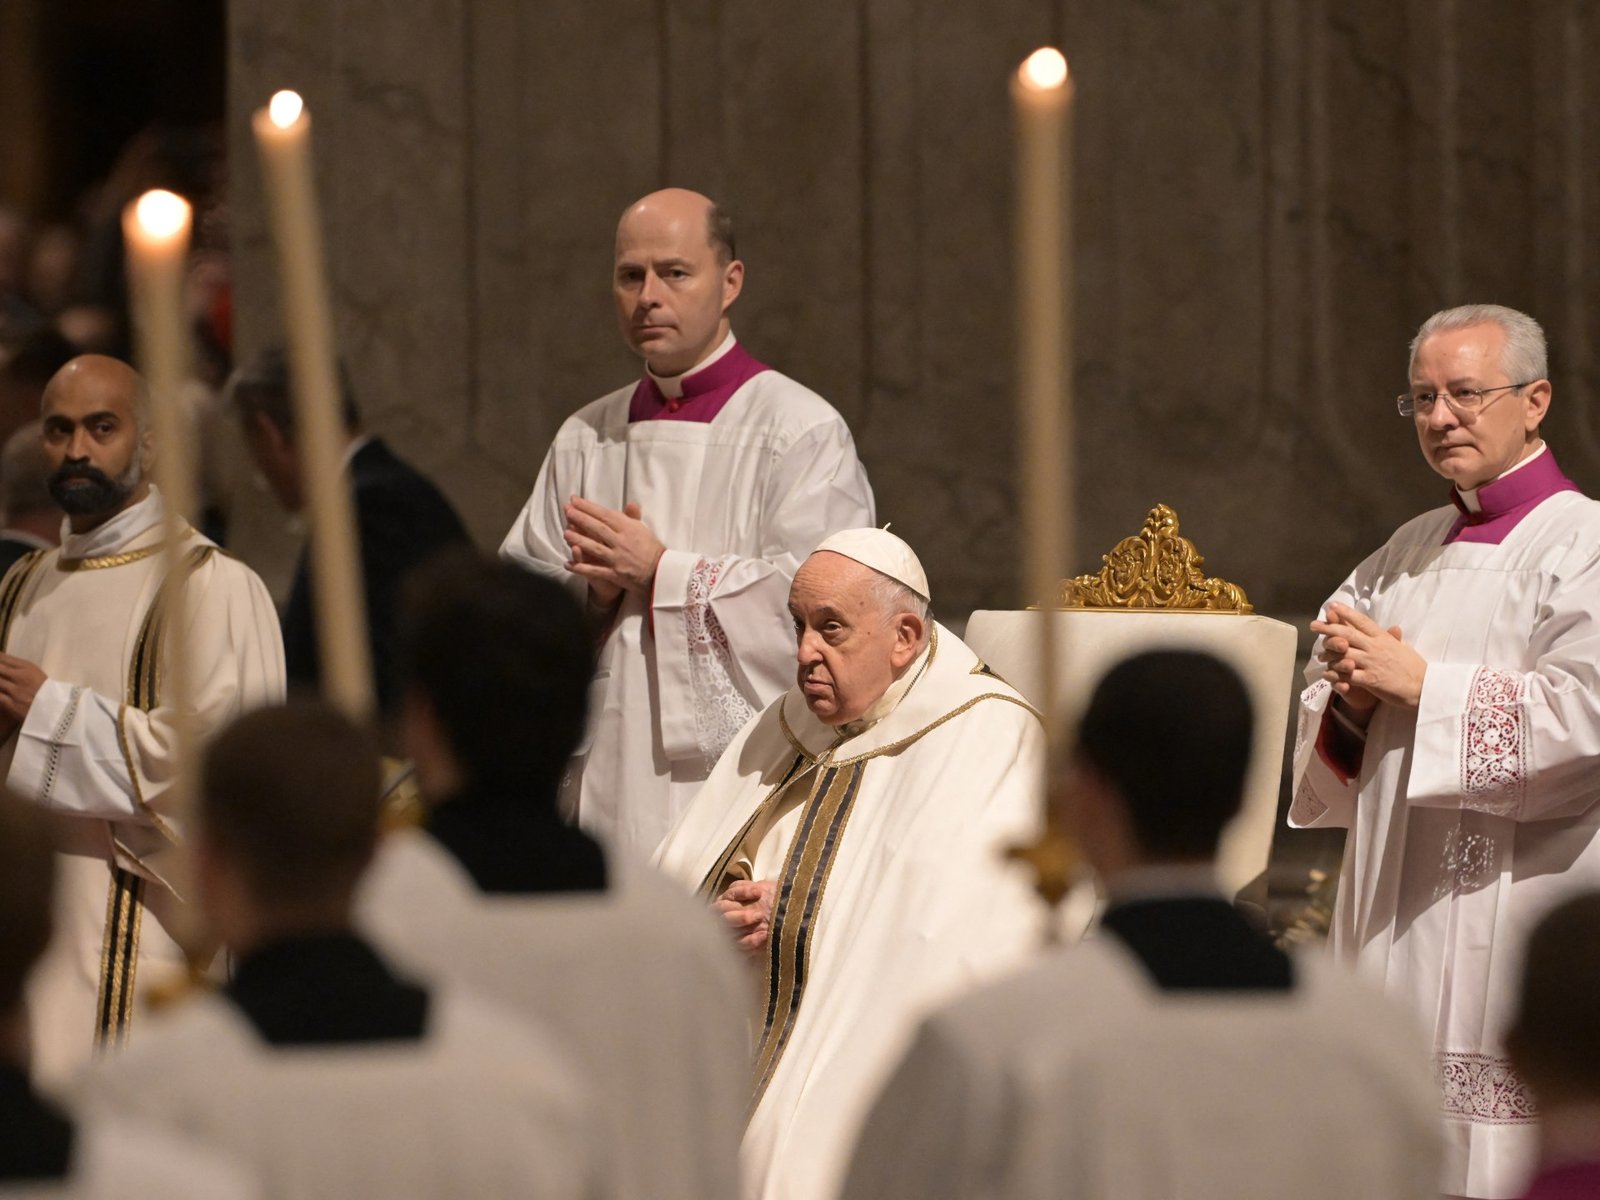 Our hearts in Bethlehem says Pope in Christmas Eve mass shadowed by war | Israel Palestine conflict News